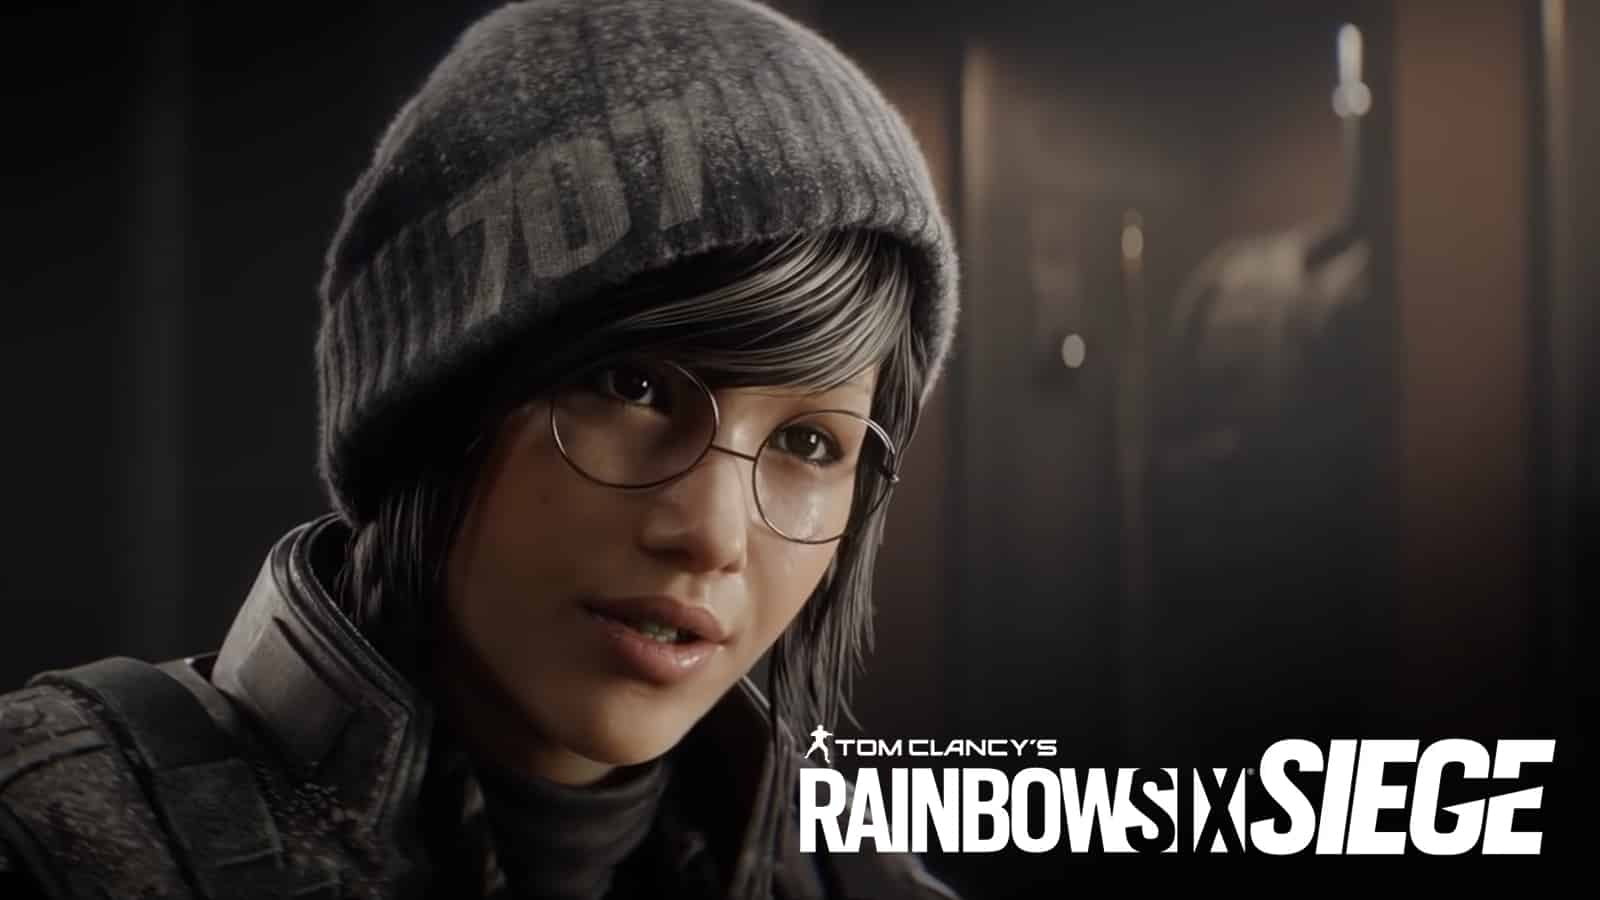 So Rainbow 6 Siege launched on luna and it has crossplay with PC